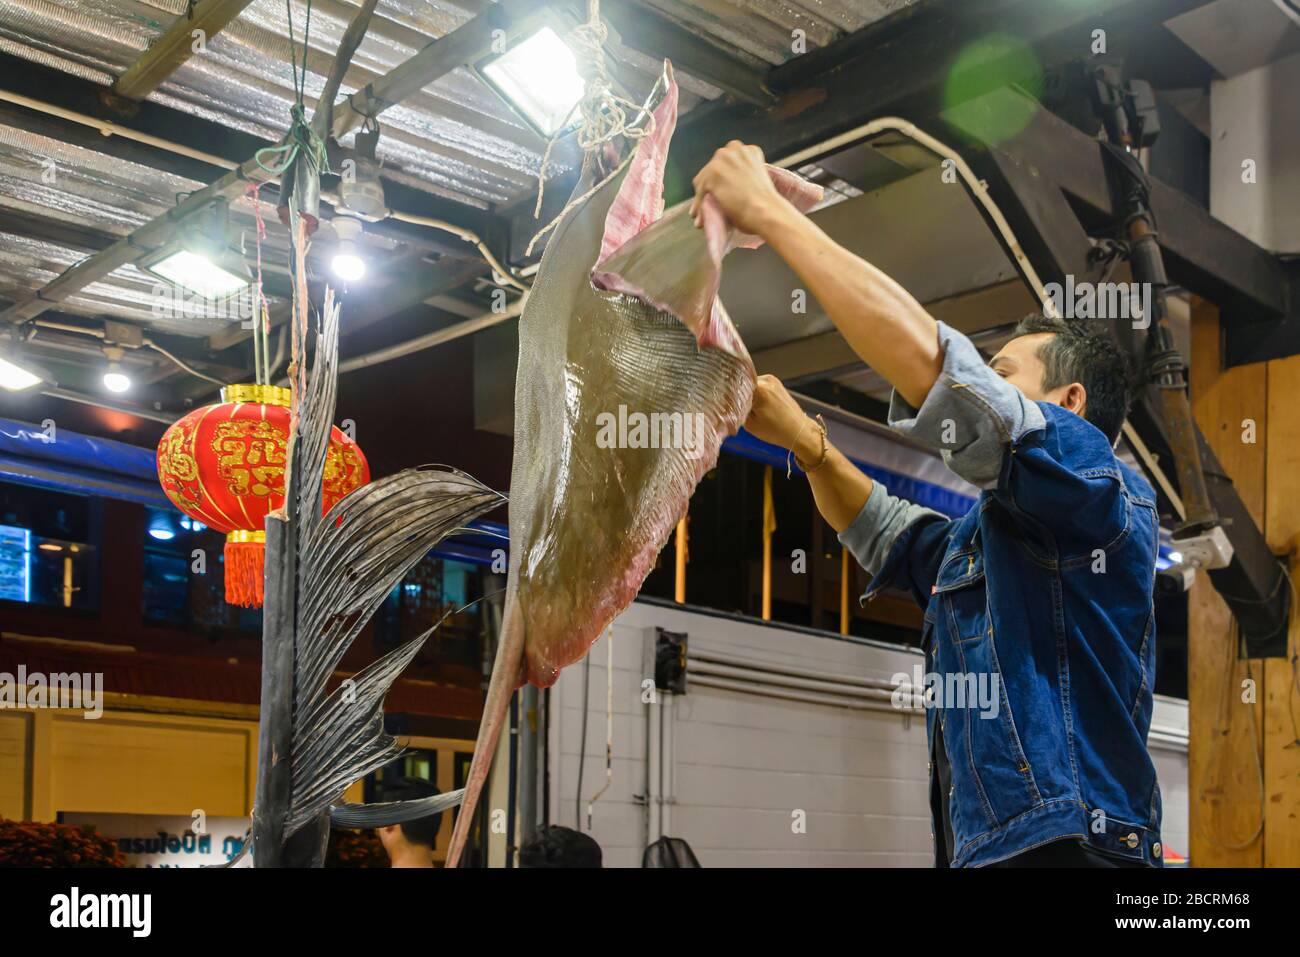 A chef cuts a large steak from a ray fish as it hangs in the kitchen of a restaurant, Phuket, Thailand Stock Photo